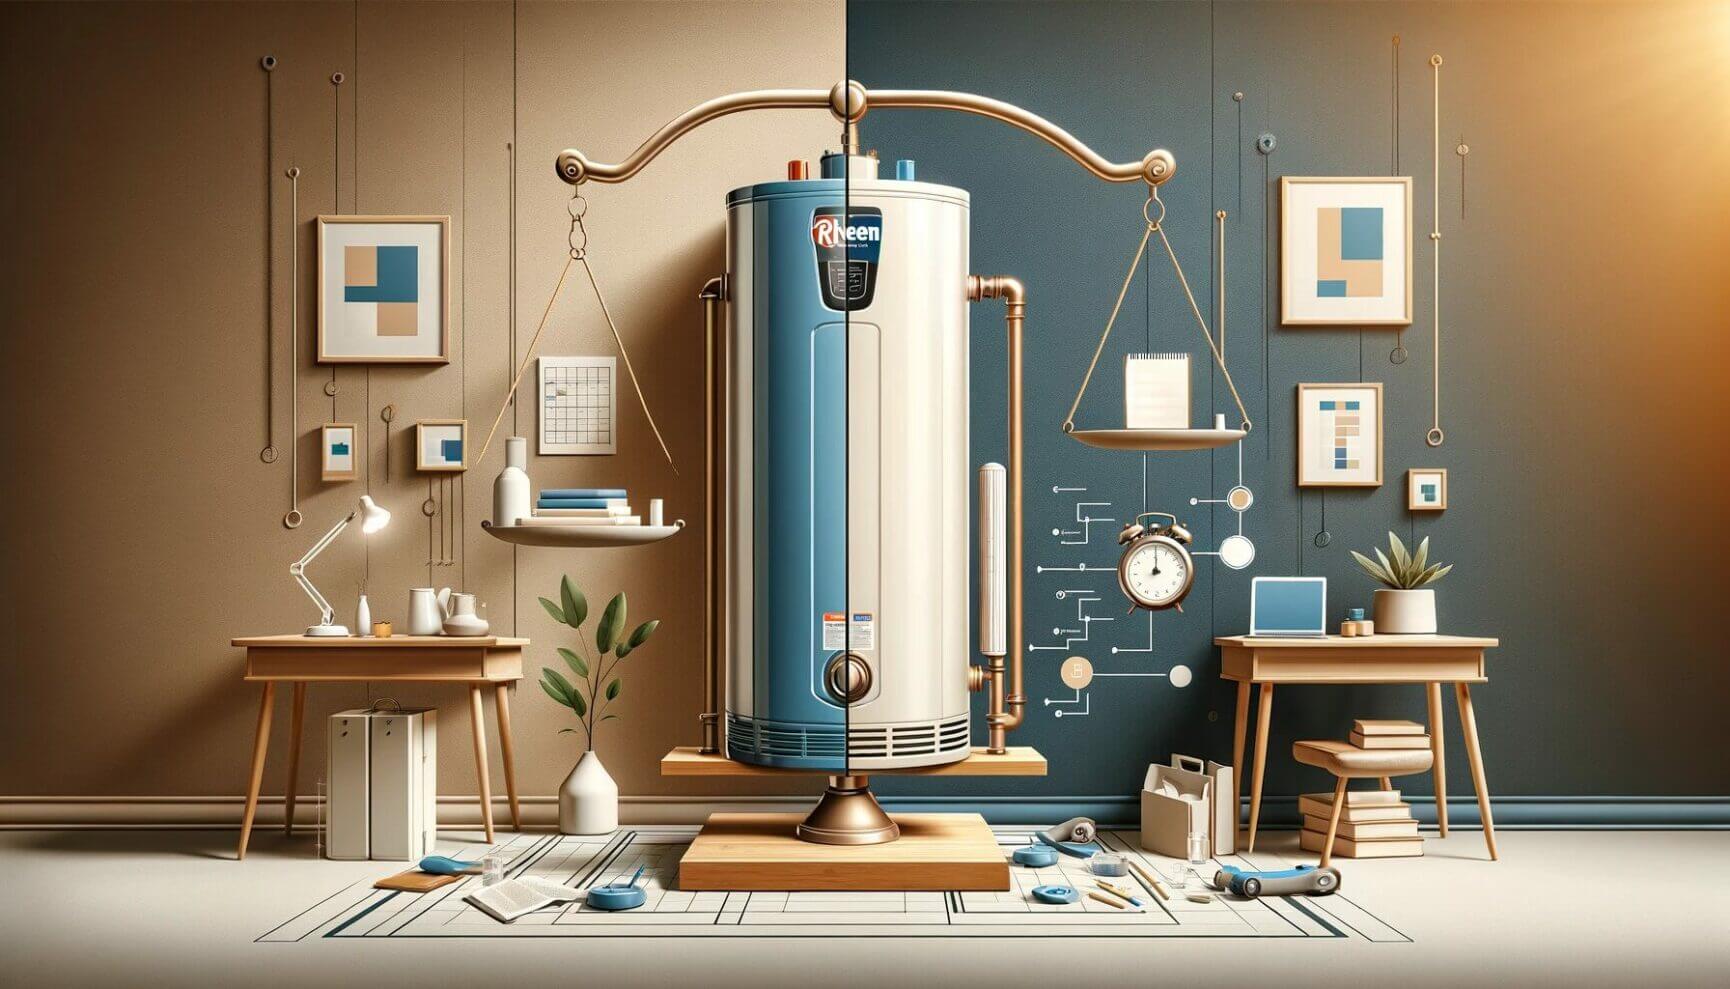 An image of a water heater in a room.